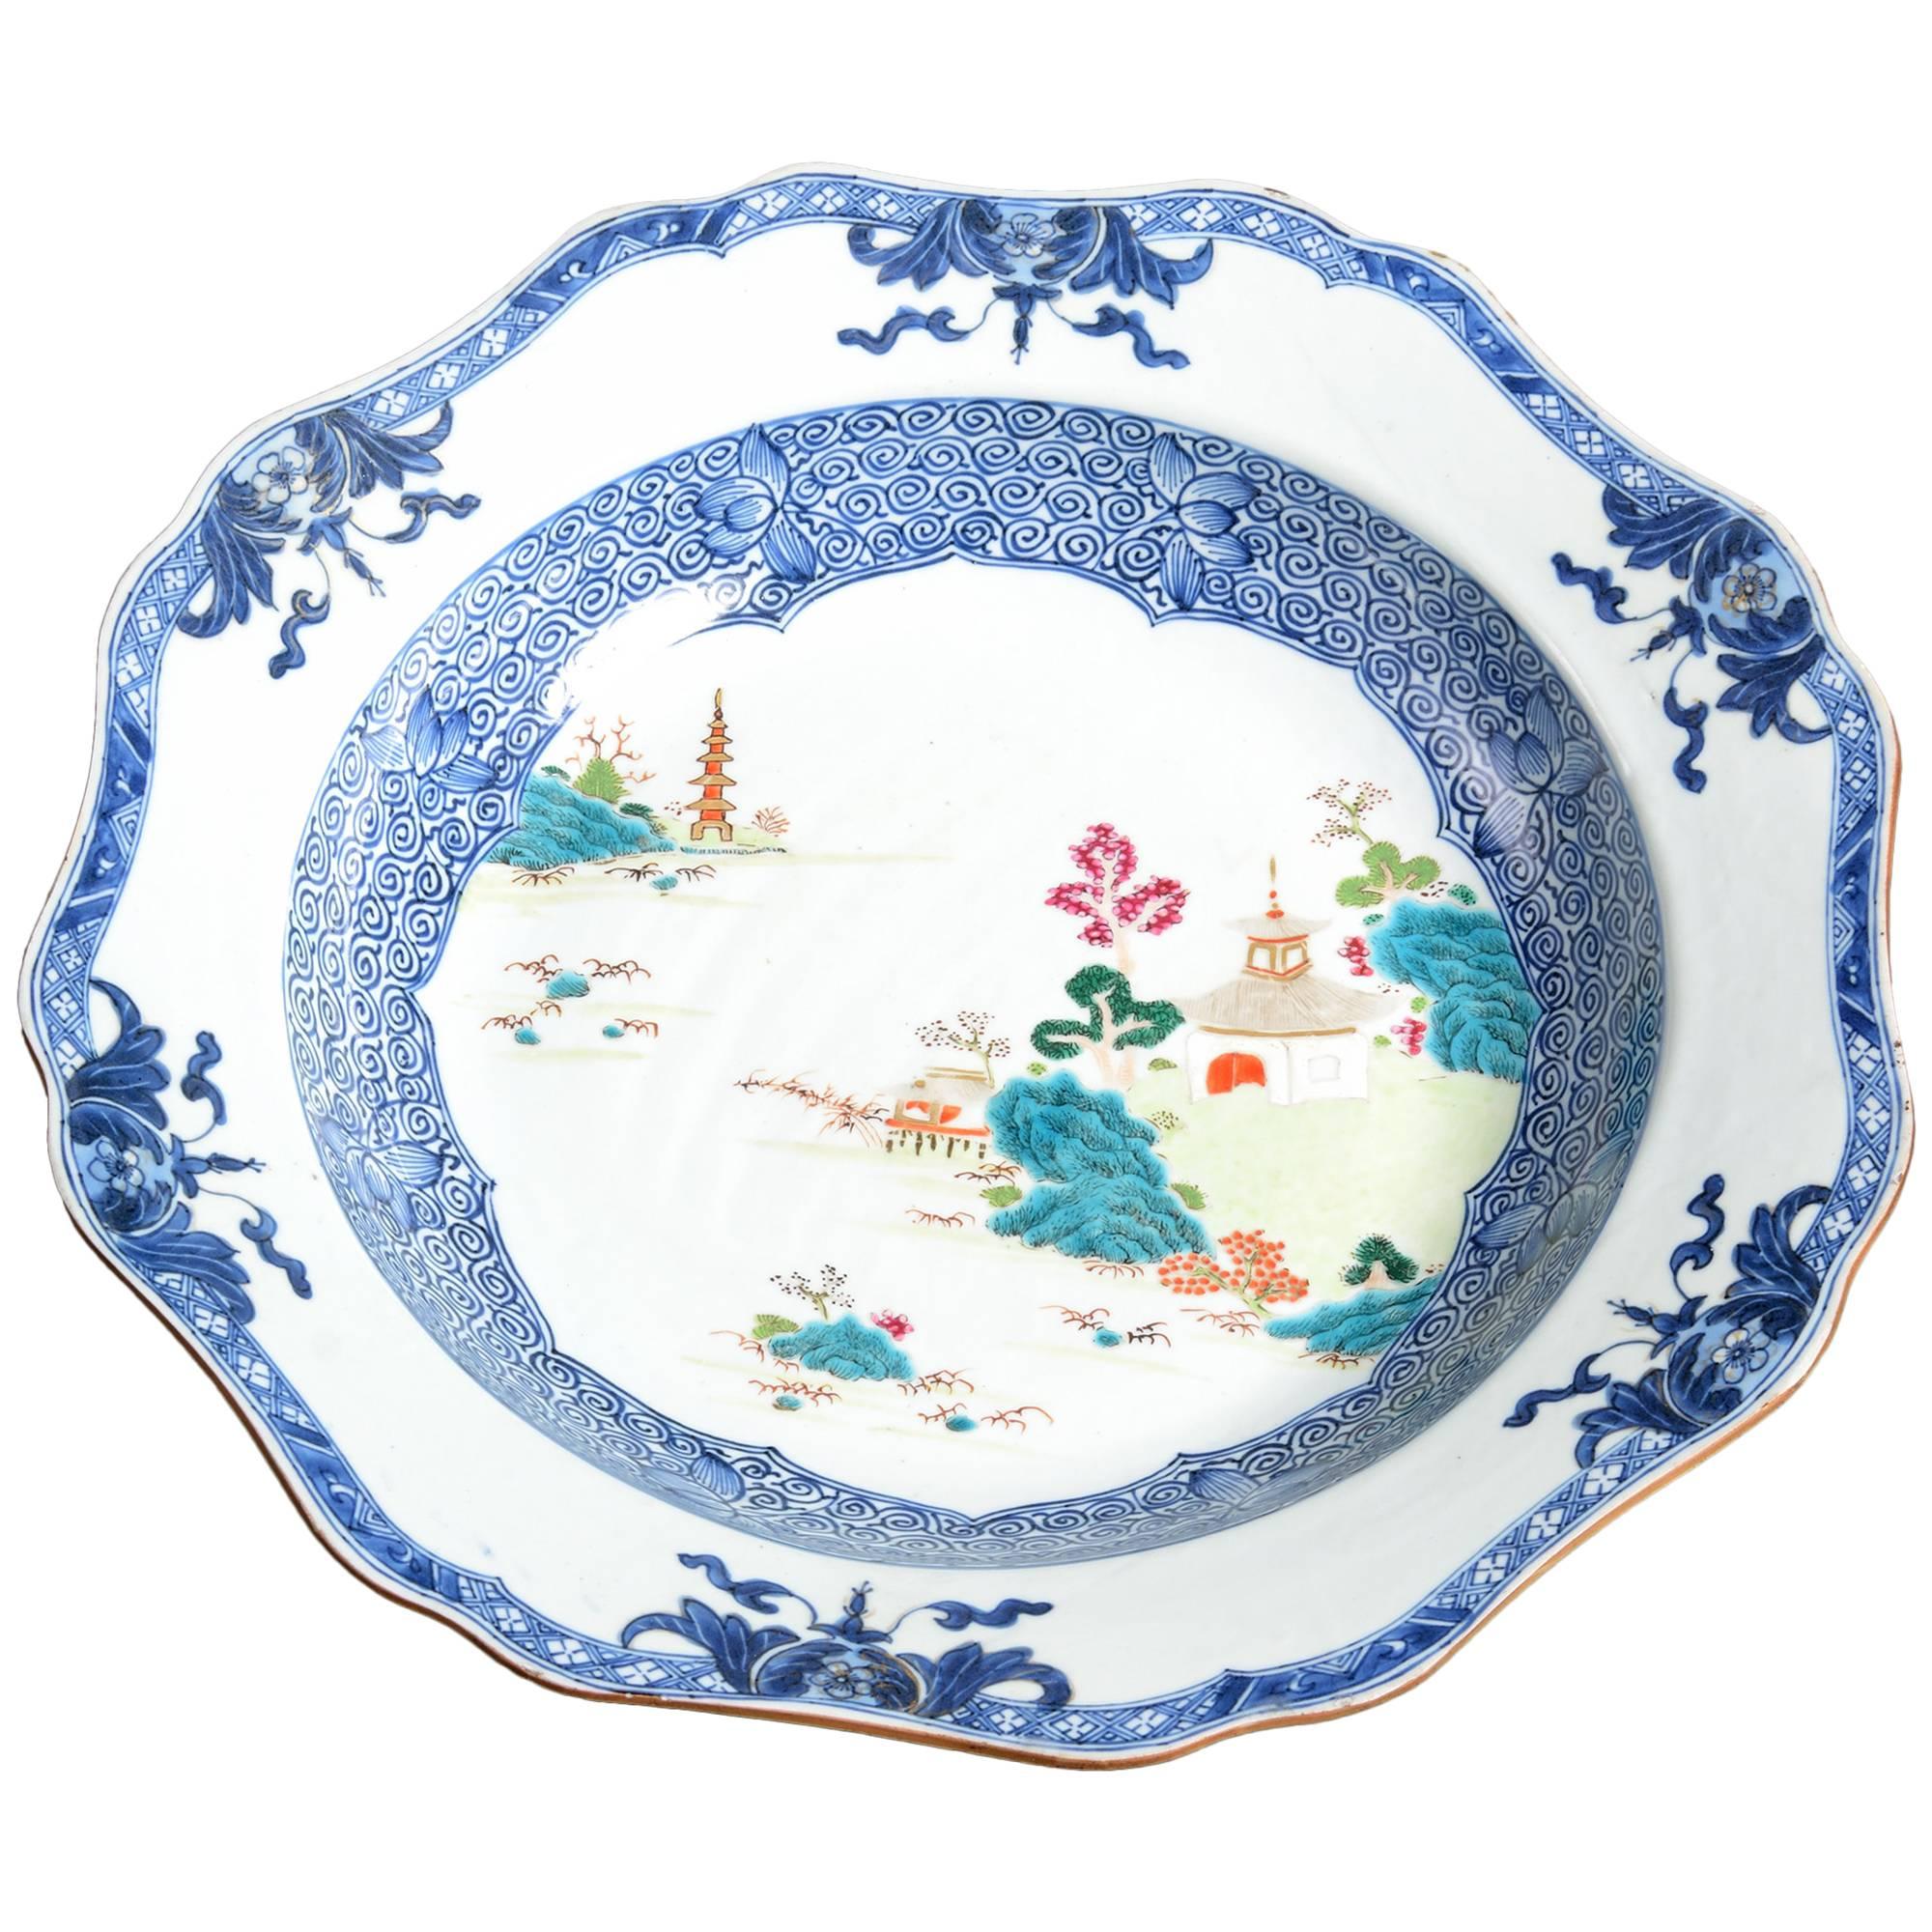 Late 18th Century Famille Rose Porcelain Bowl